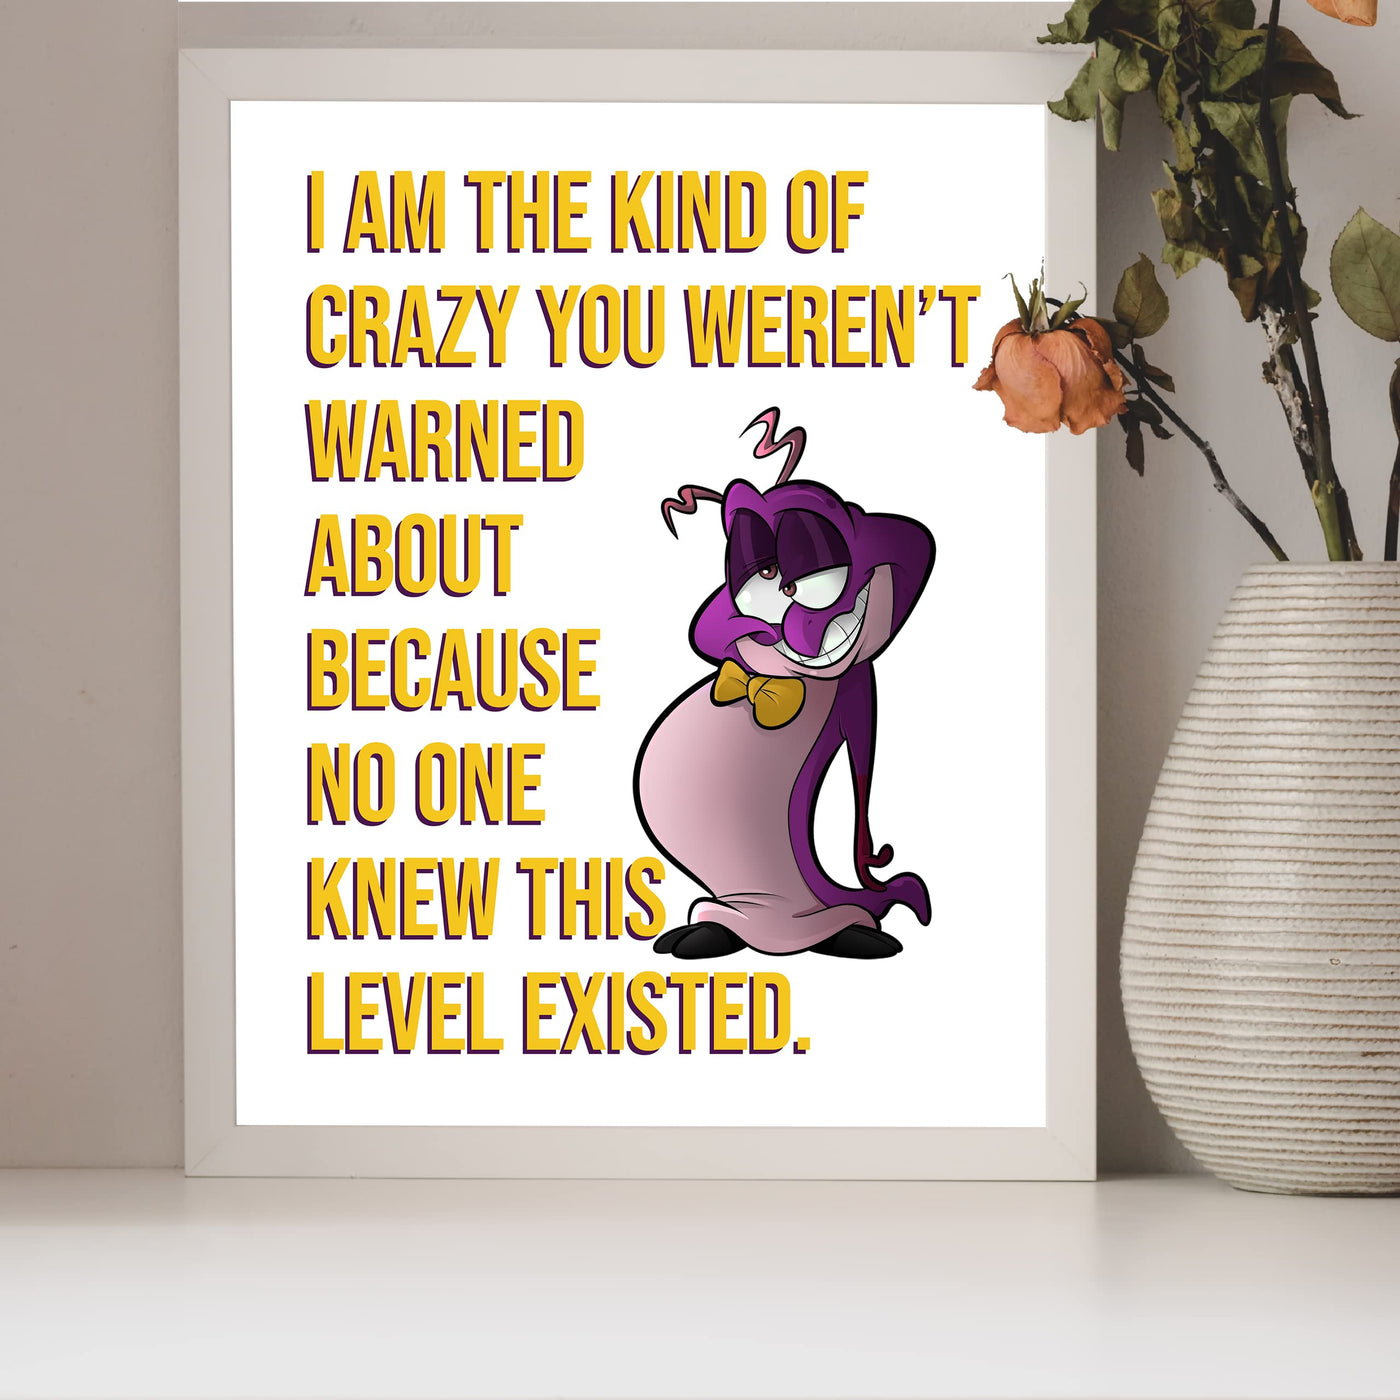 I'm the Kind of Crazy You Weren't Warned About Funny Wall Decor Sign -8 x 10" Sarcastic Art Print -Ready to Frame. Humorous Decoration for Home-Office-Bar-Man Cave-Pub Decor. Fun Novelty Gift!